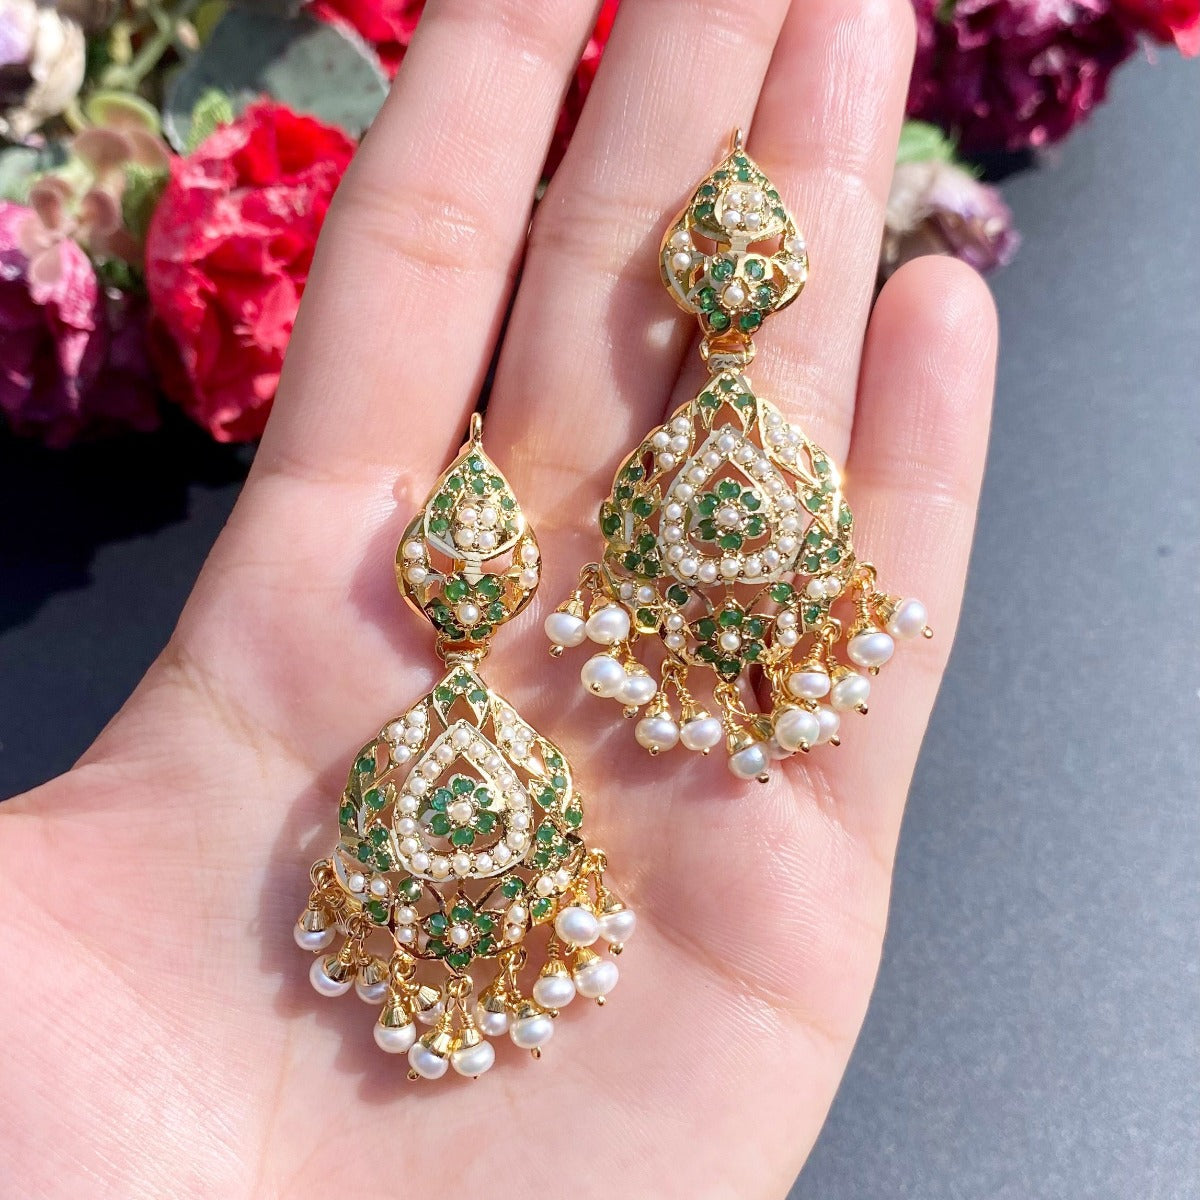 earrings matching the emerald necklace set